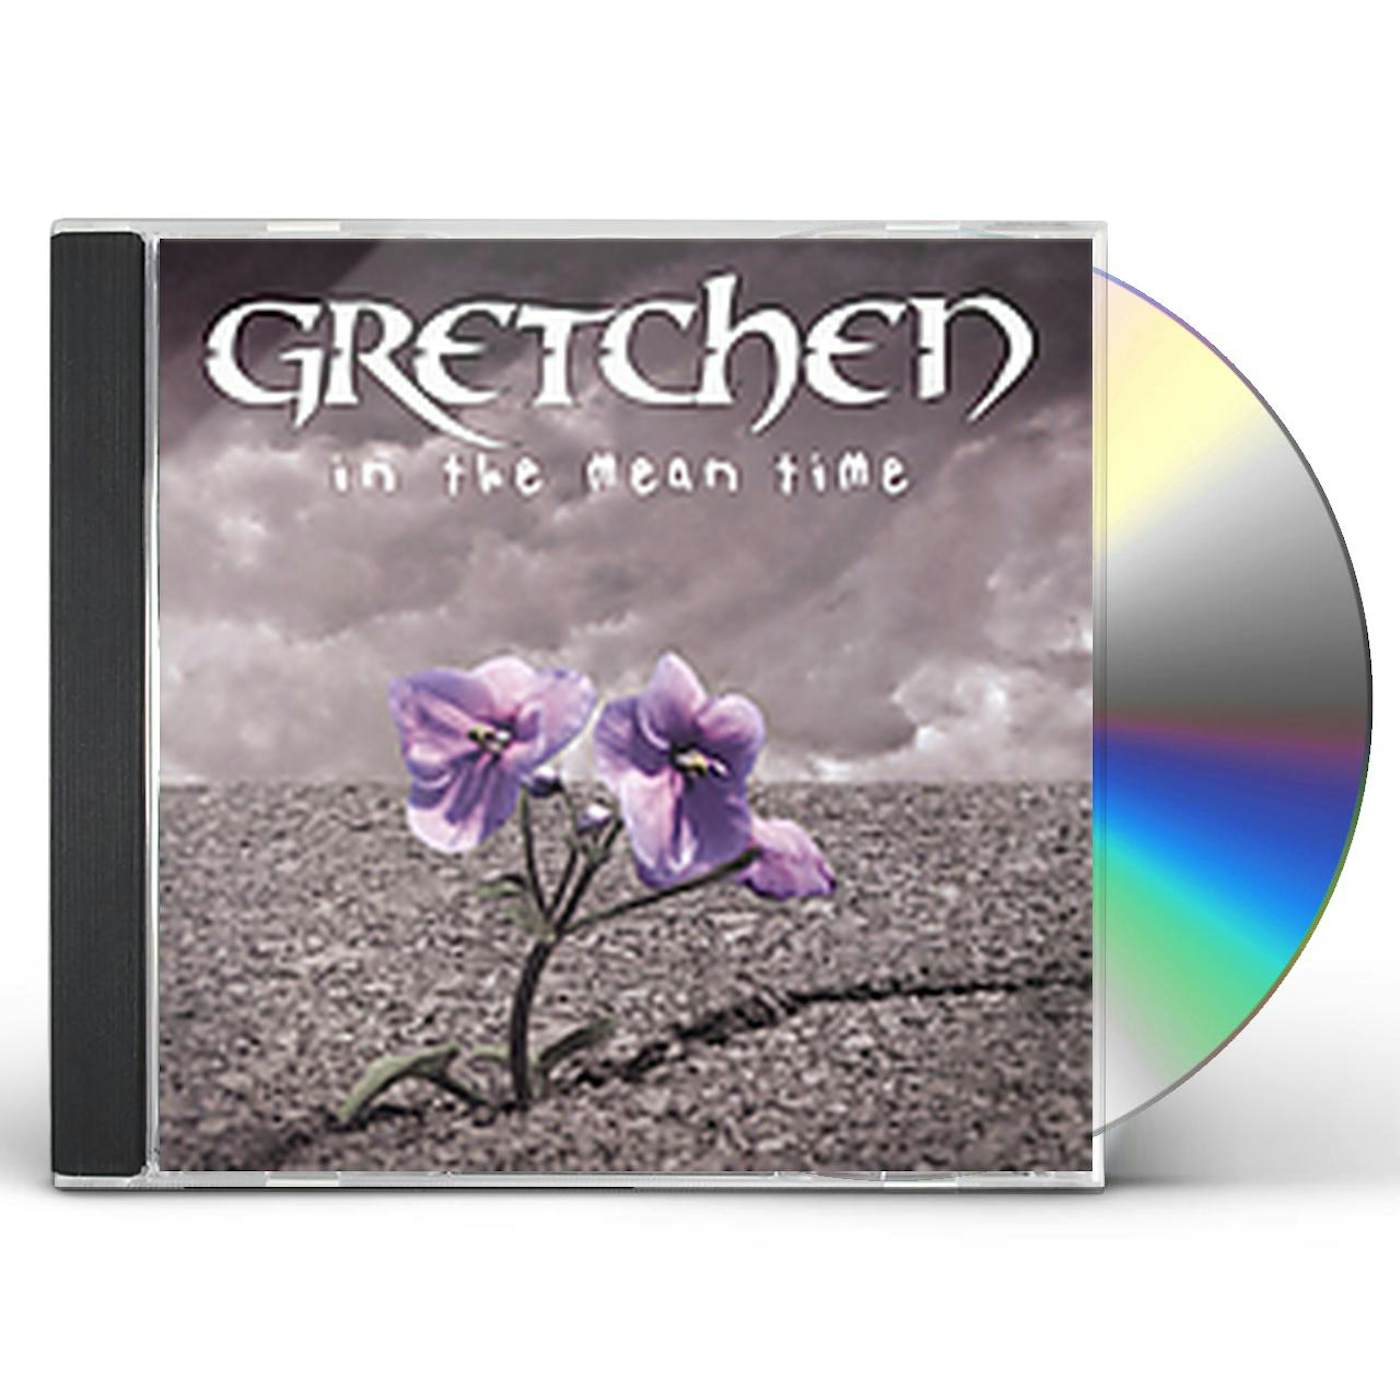 Gretchen IN THE MEAN TIME CD